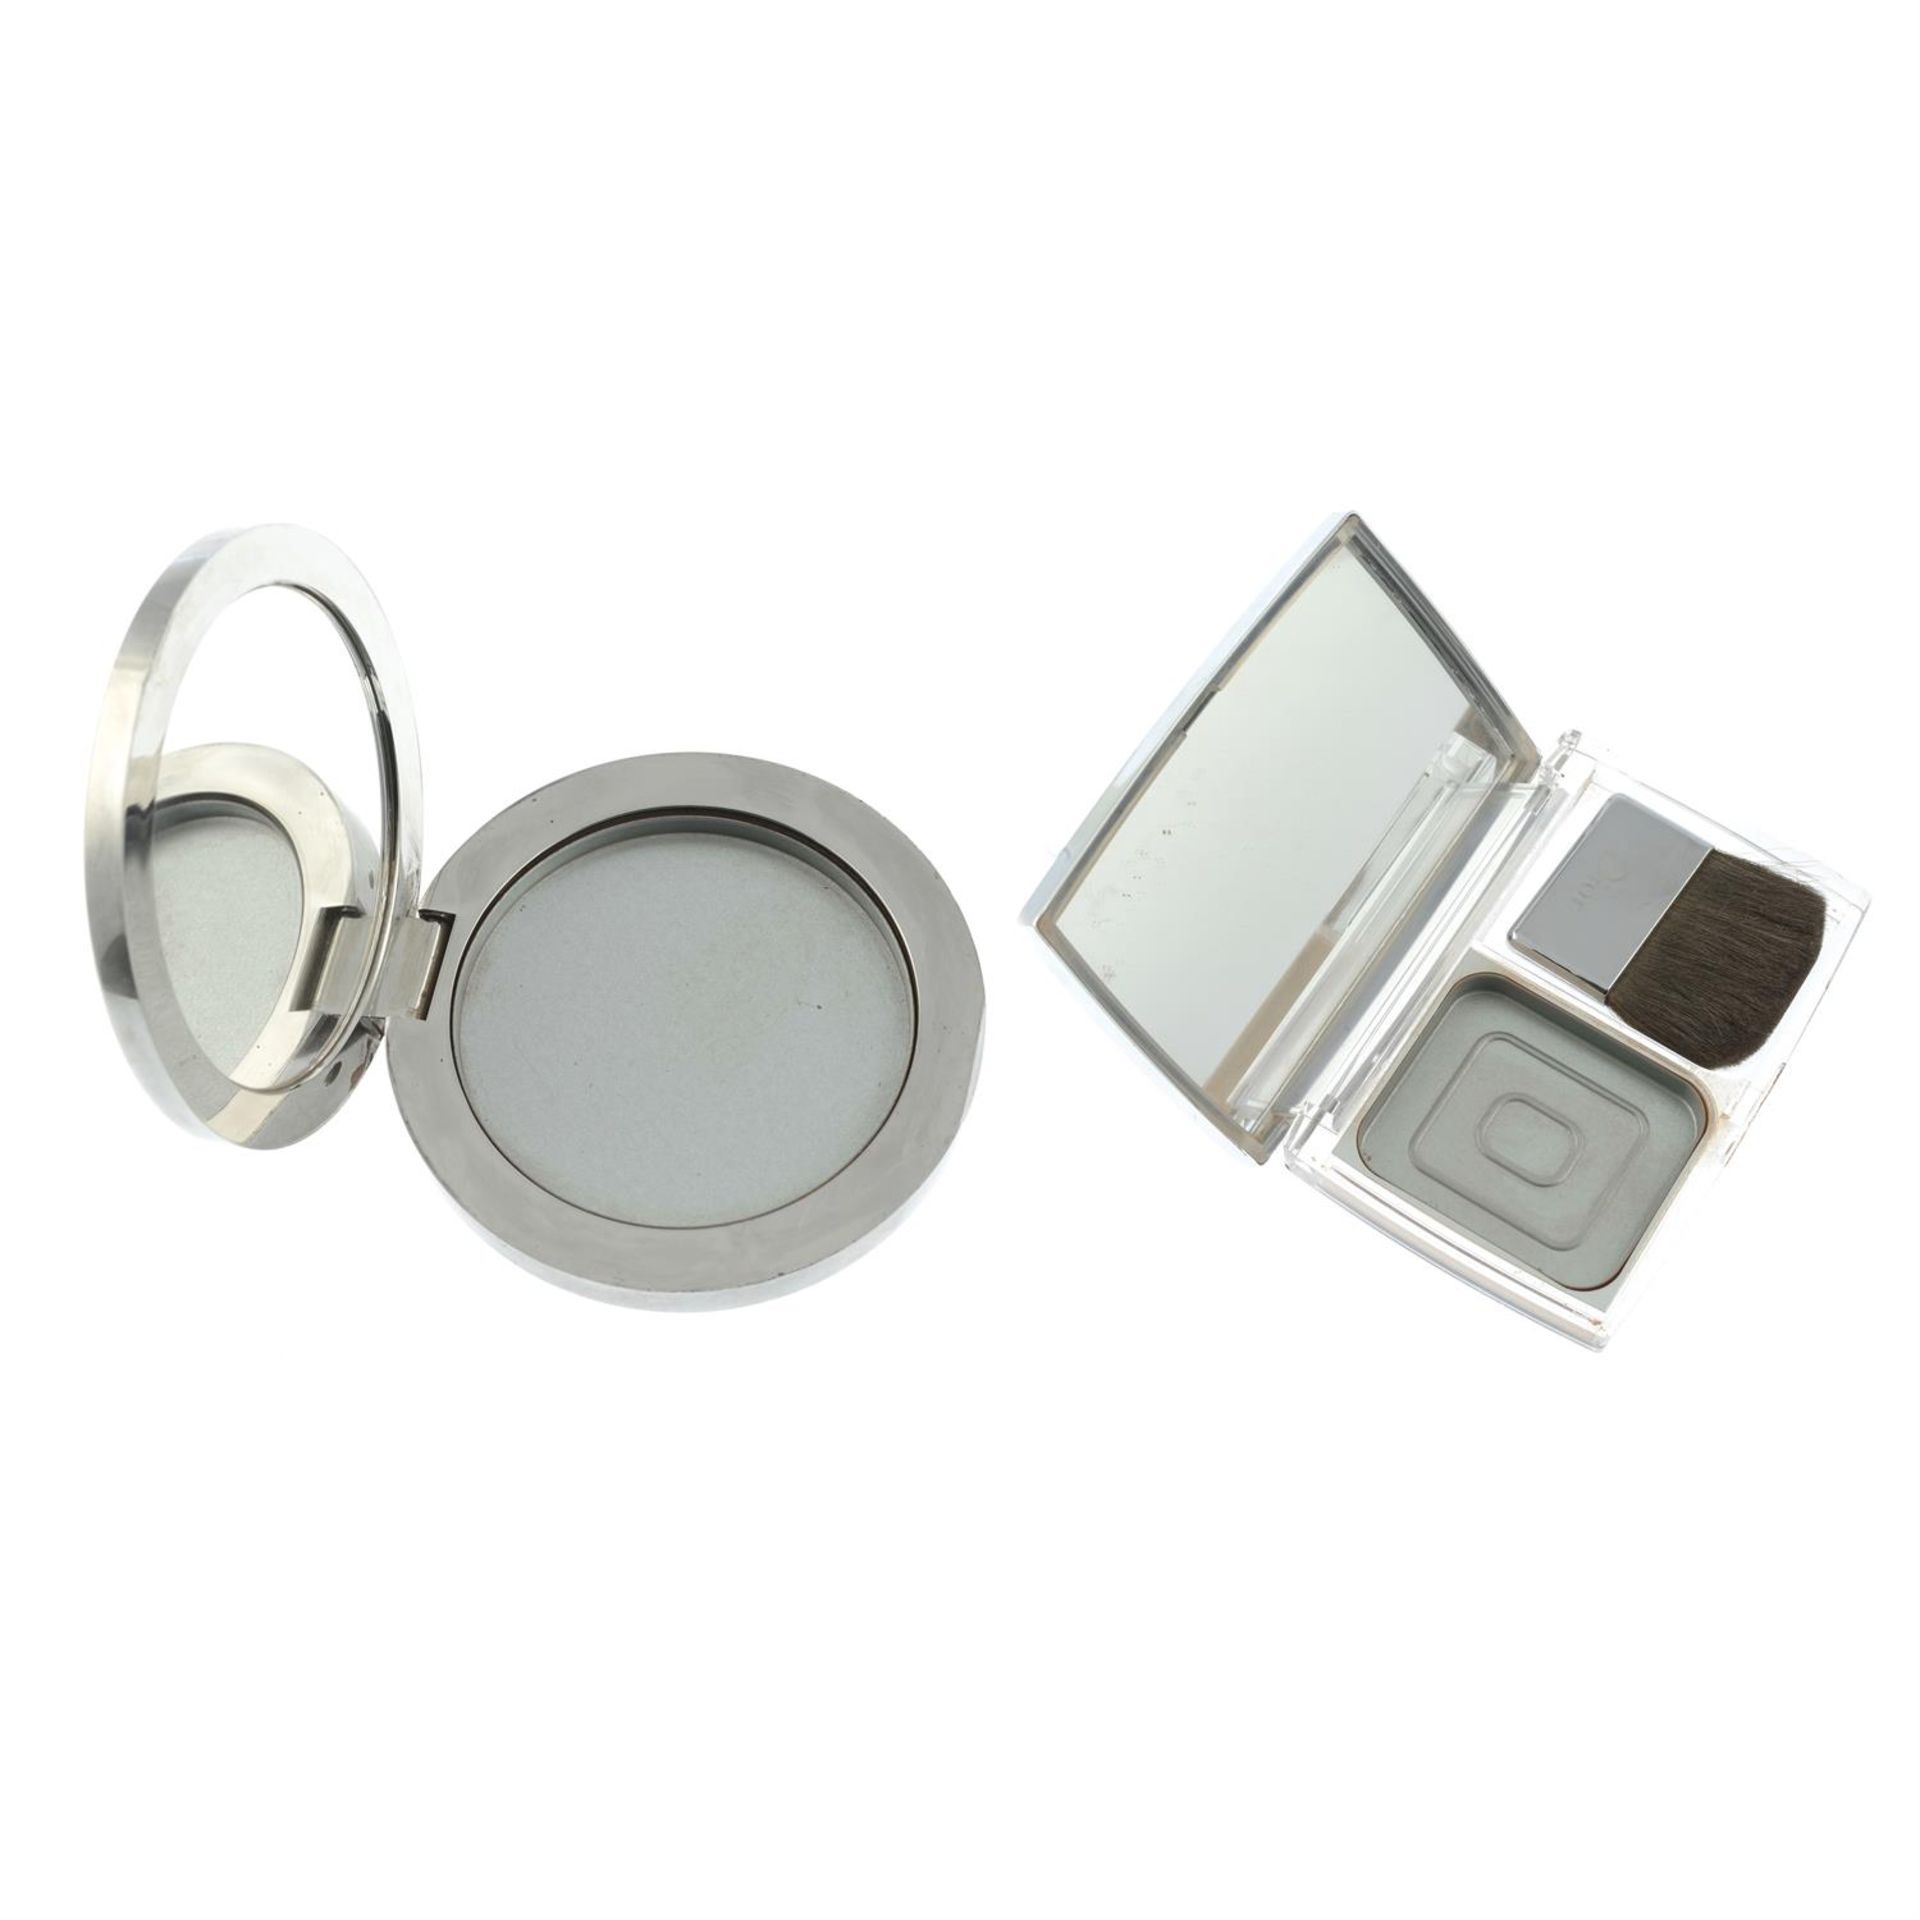 CHRISTIAN DIOR - two powder and mirror compacts. - Image 3 of 3